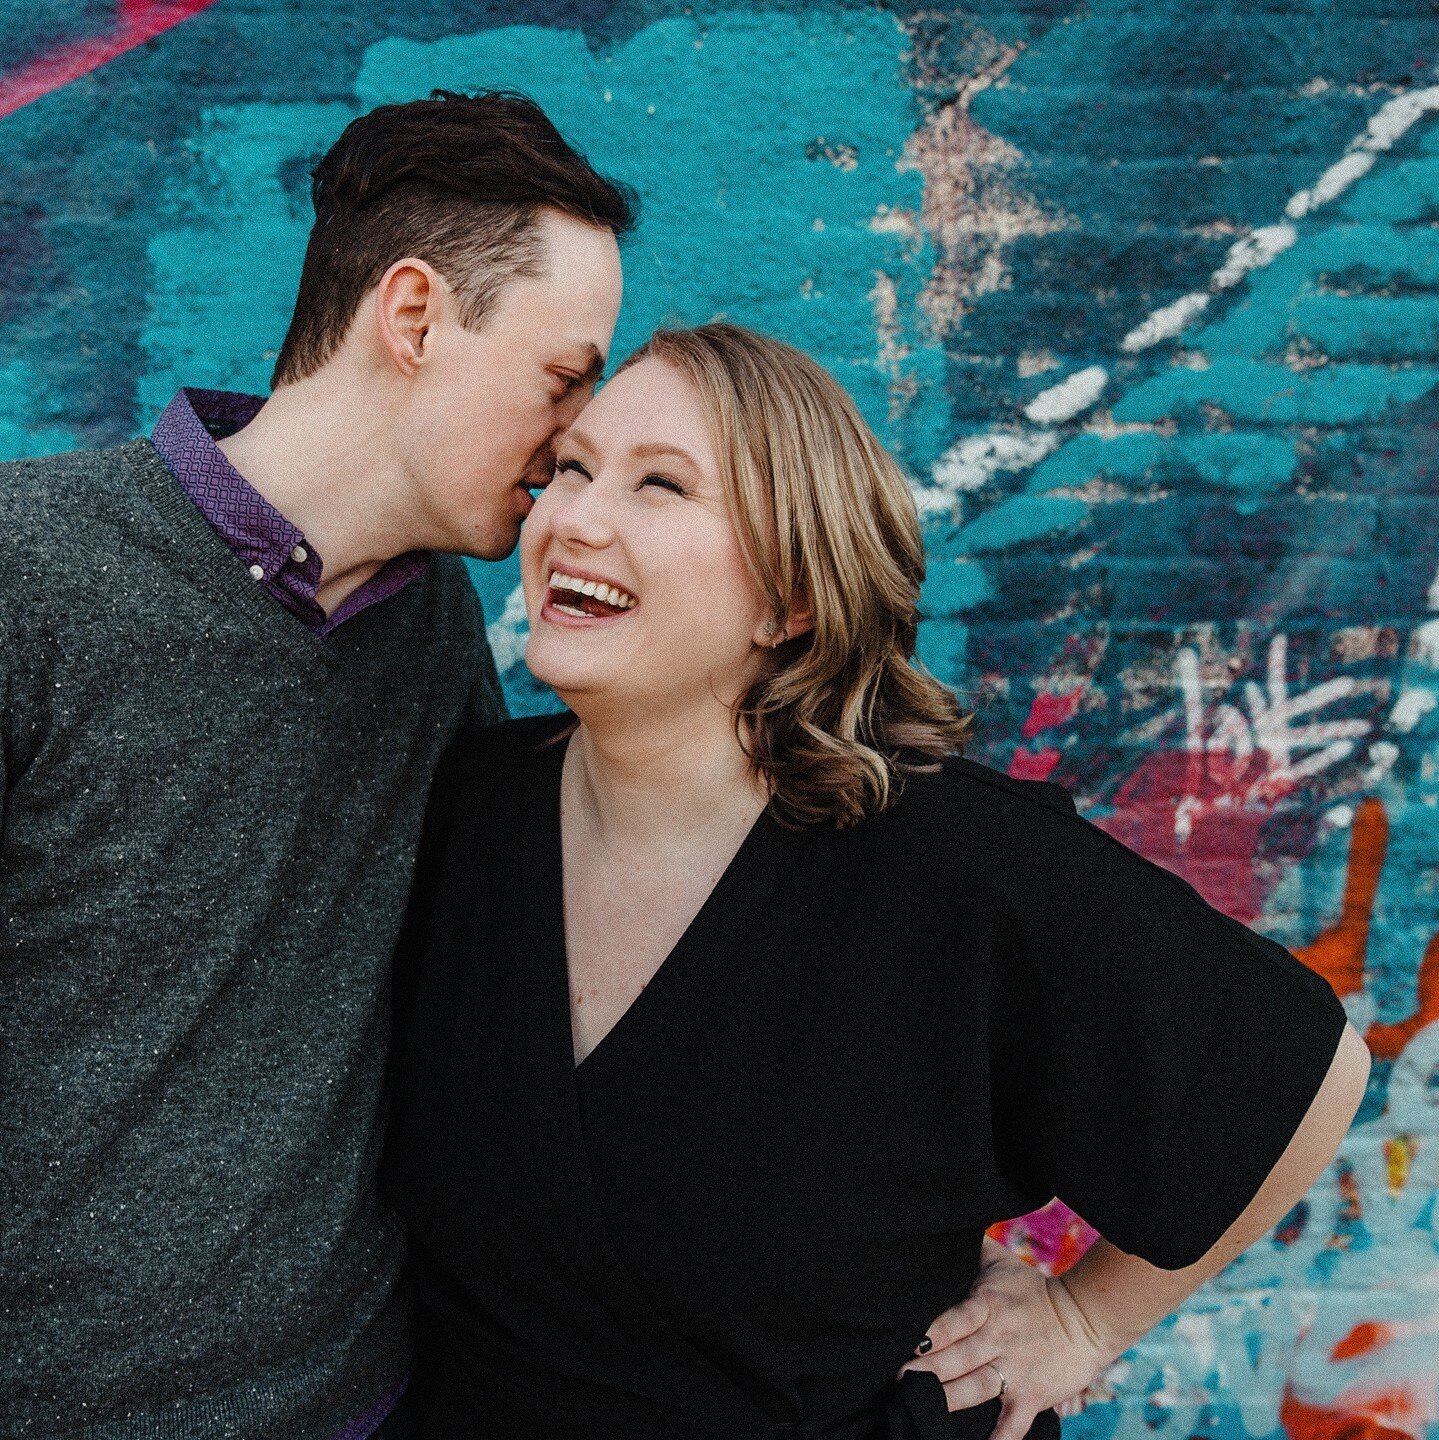 Engagement sessions are a great way for camera-shy folks to get comfortable in front of the camera 𝘣𝘦𝘧𝘰𝘳𝘦 their wedding day! You can also use engagement photos for things like save the dates, the guest book, the wedding website for friends &amp